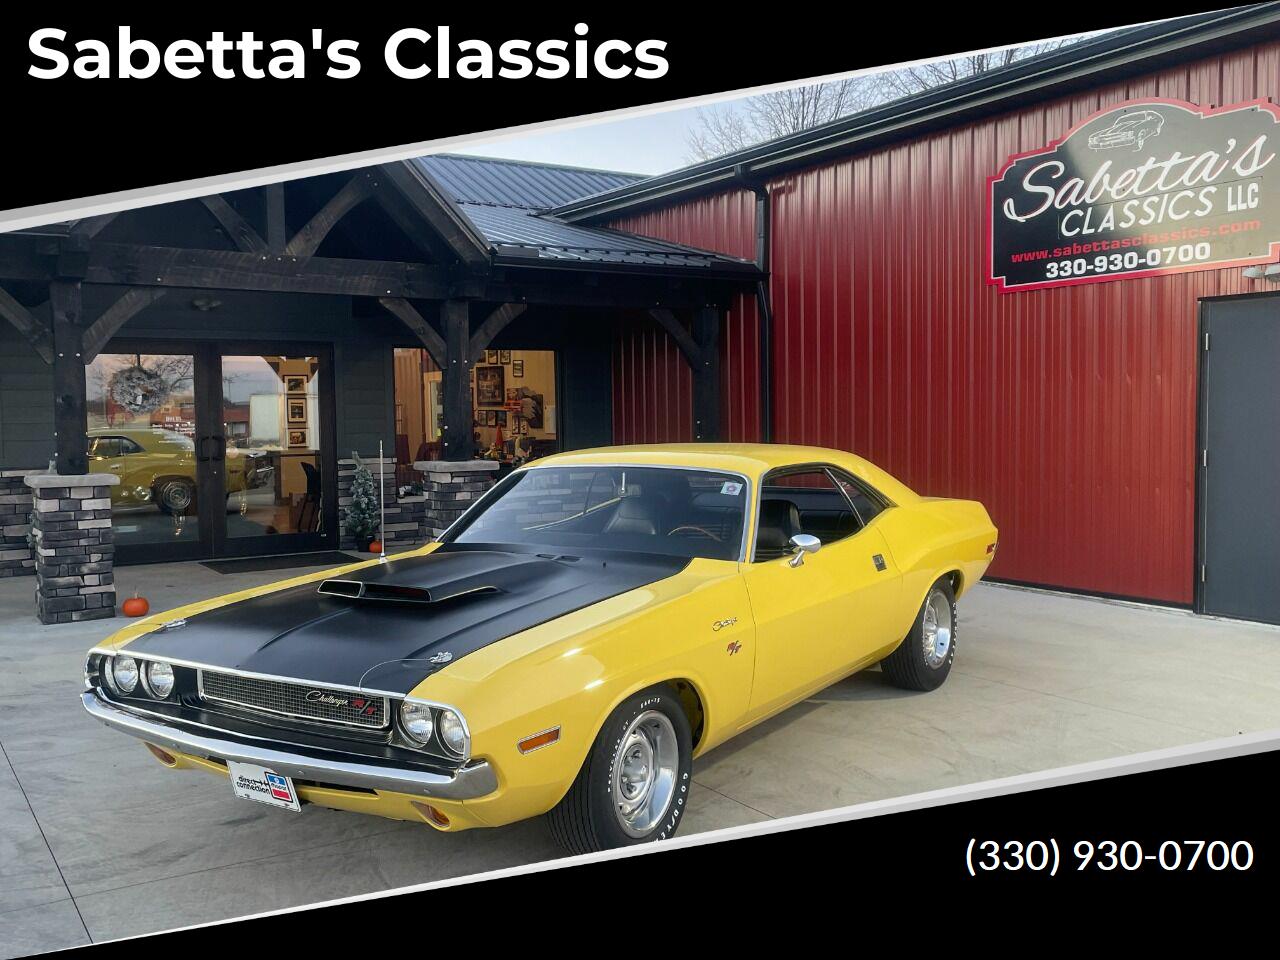 For Sale: 1970 Dodge Challenger R/T in Orrville, Ohio for sale in Orrville, OH